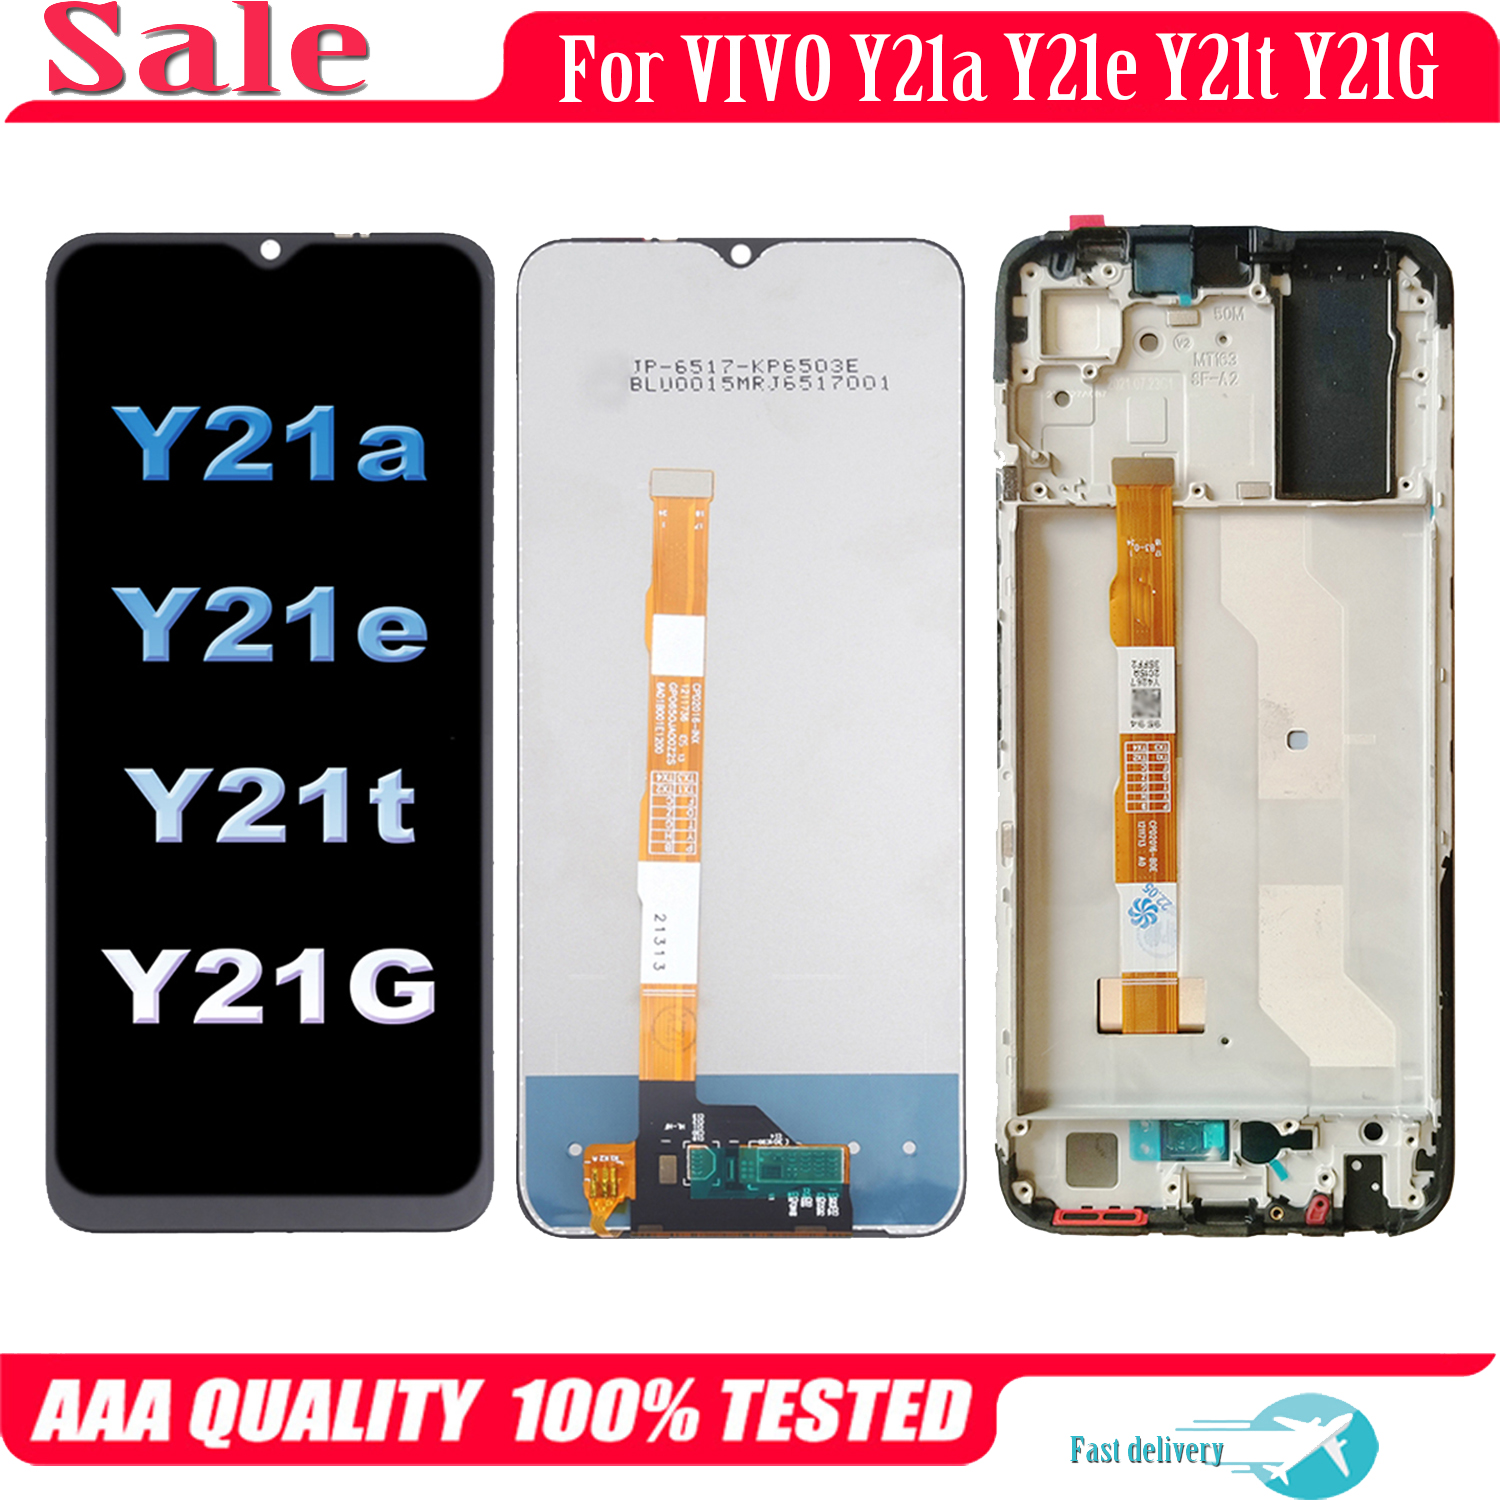 6-51-Original-For-VIVO-Y21a-Y21e-Y21G-Y21t-LCD-V2135-V2140-Display-Touch-Screen-Replacement